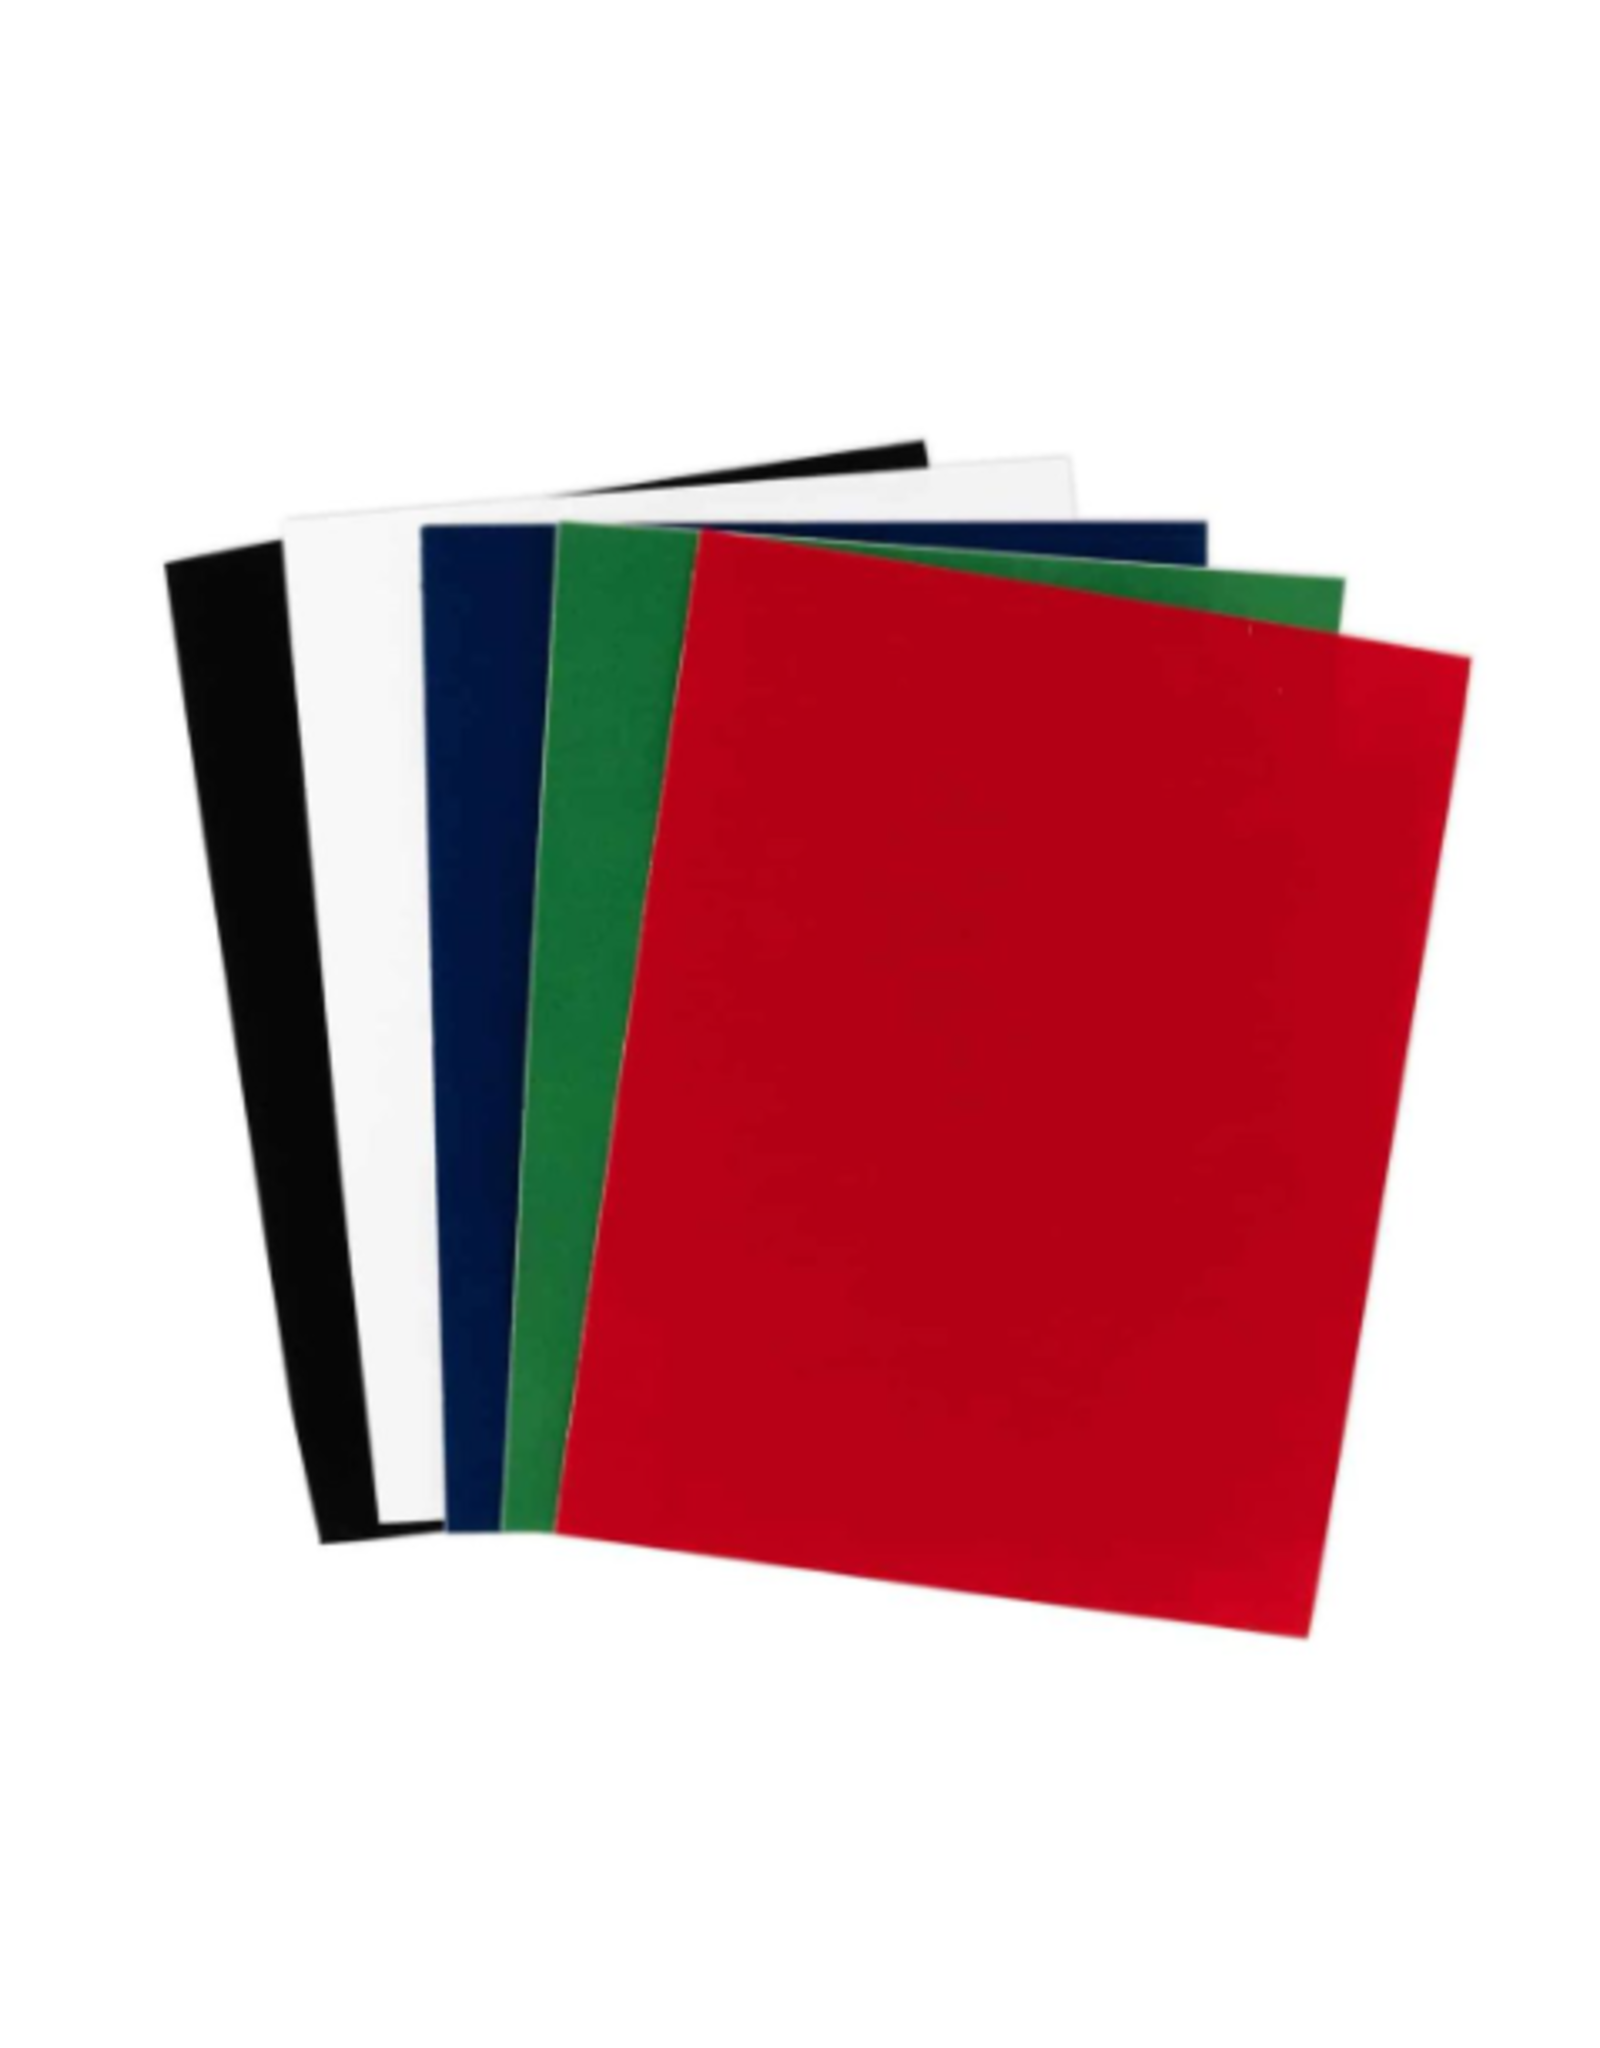 HYGLOSS VELOUR PAPER Self-Adhesive, ASSORTED 5PK